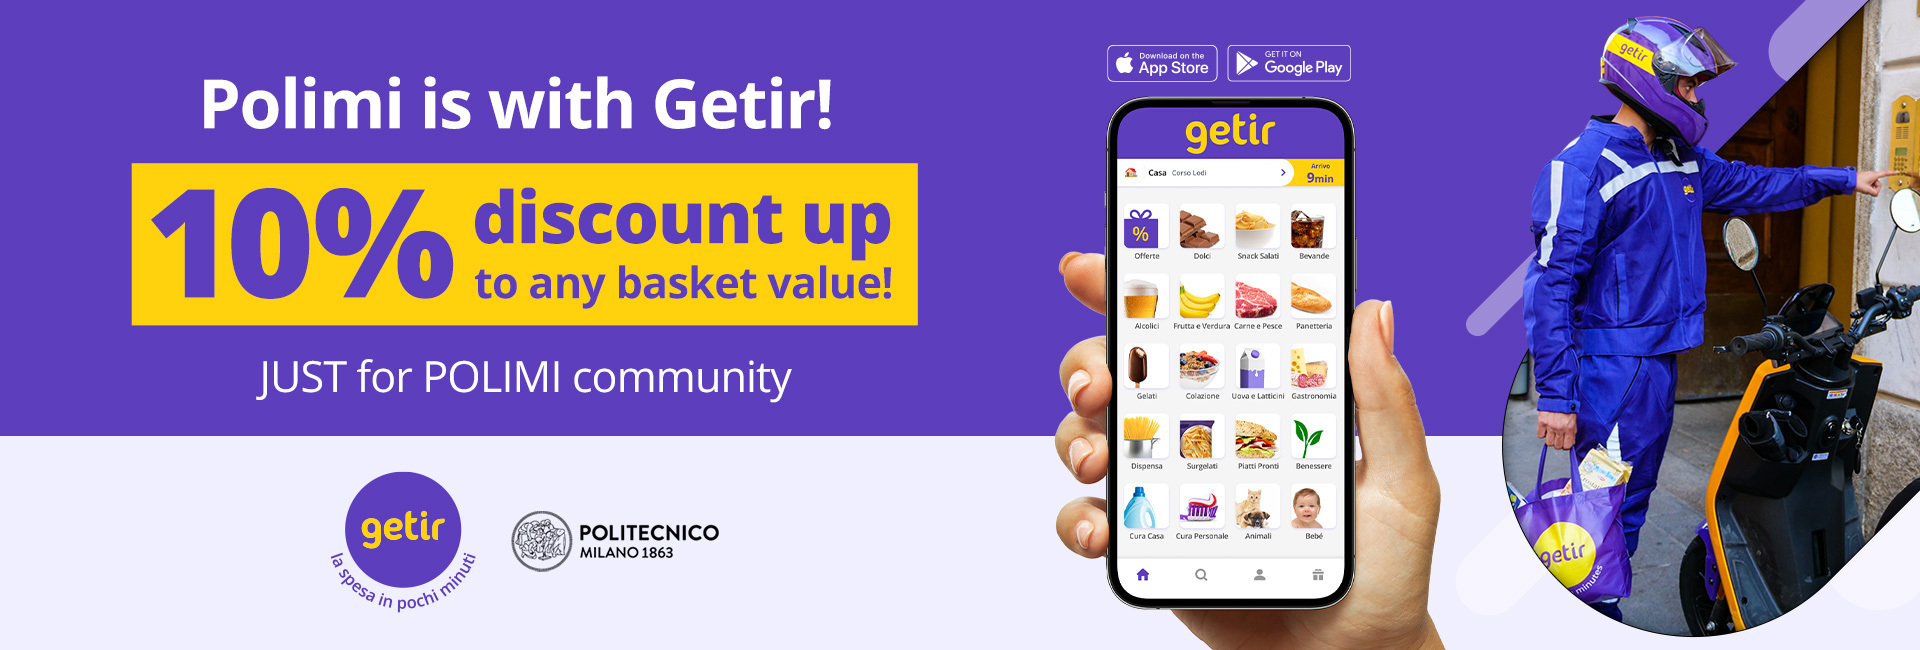 Polimi is with Getir! 10% discount up to any basket value! JUST for POLIMI community